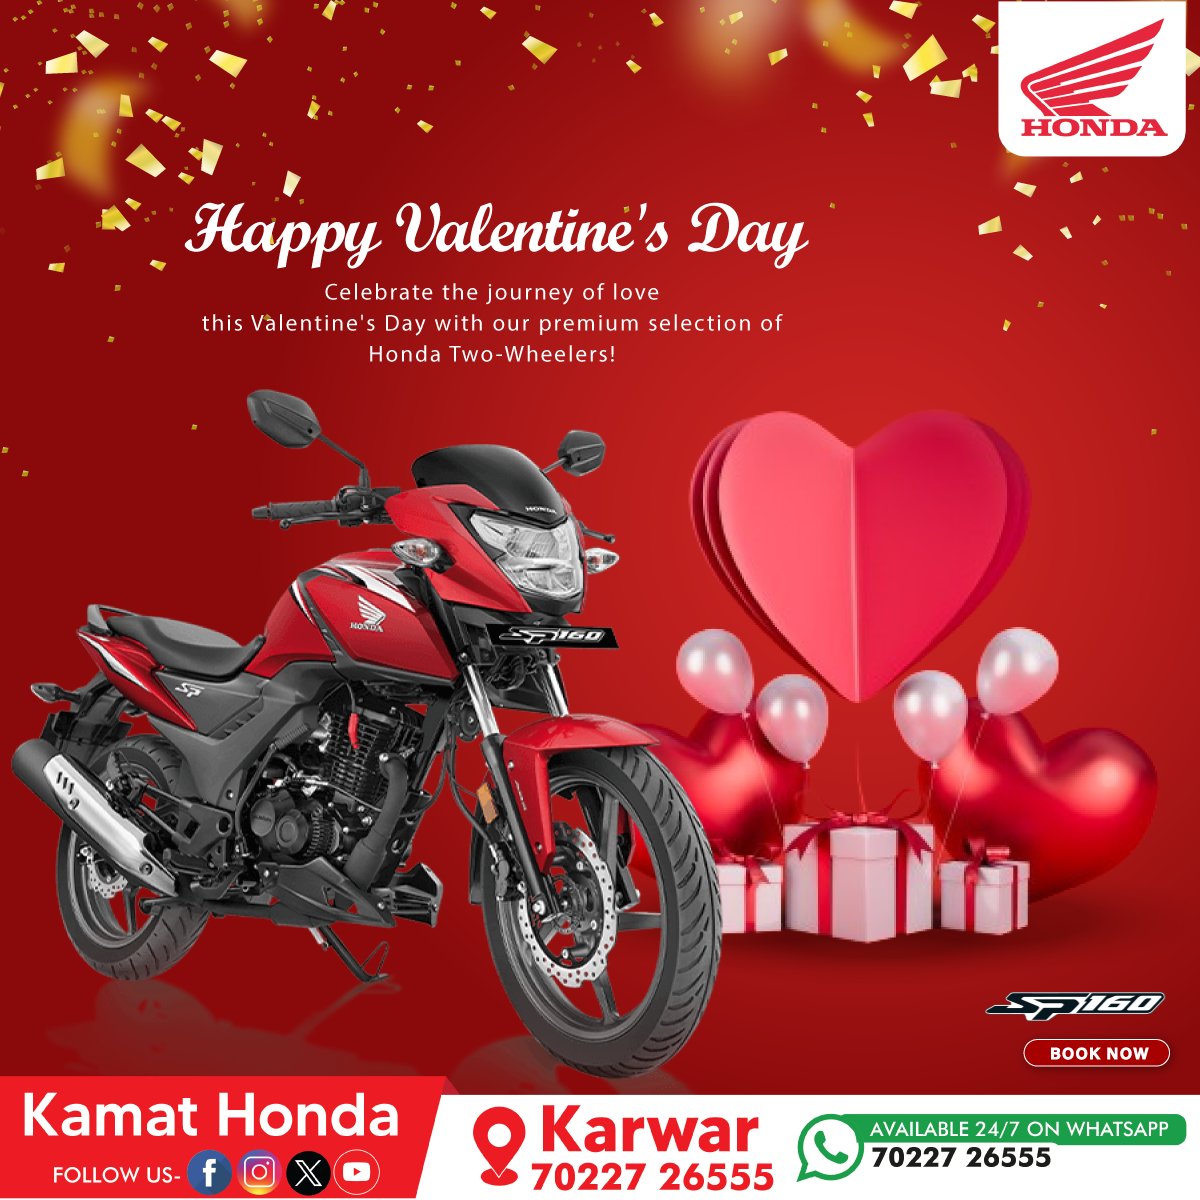 Love is in the air, and so are our premium Honda Two-Wheelers! 💖 Celebrate the journey of love this Valentine's Day with us! #HappyValentinesDay
To know more, please contact:
📲70227 26555
#KamatHonda #ValentinesDay #LoveIsInTheAir #RomanticMoments #BeMyValentine #HeartfeltLove